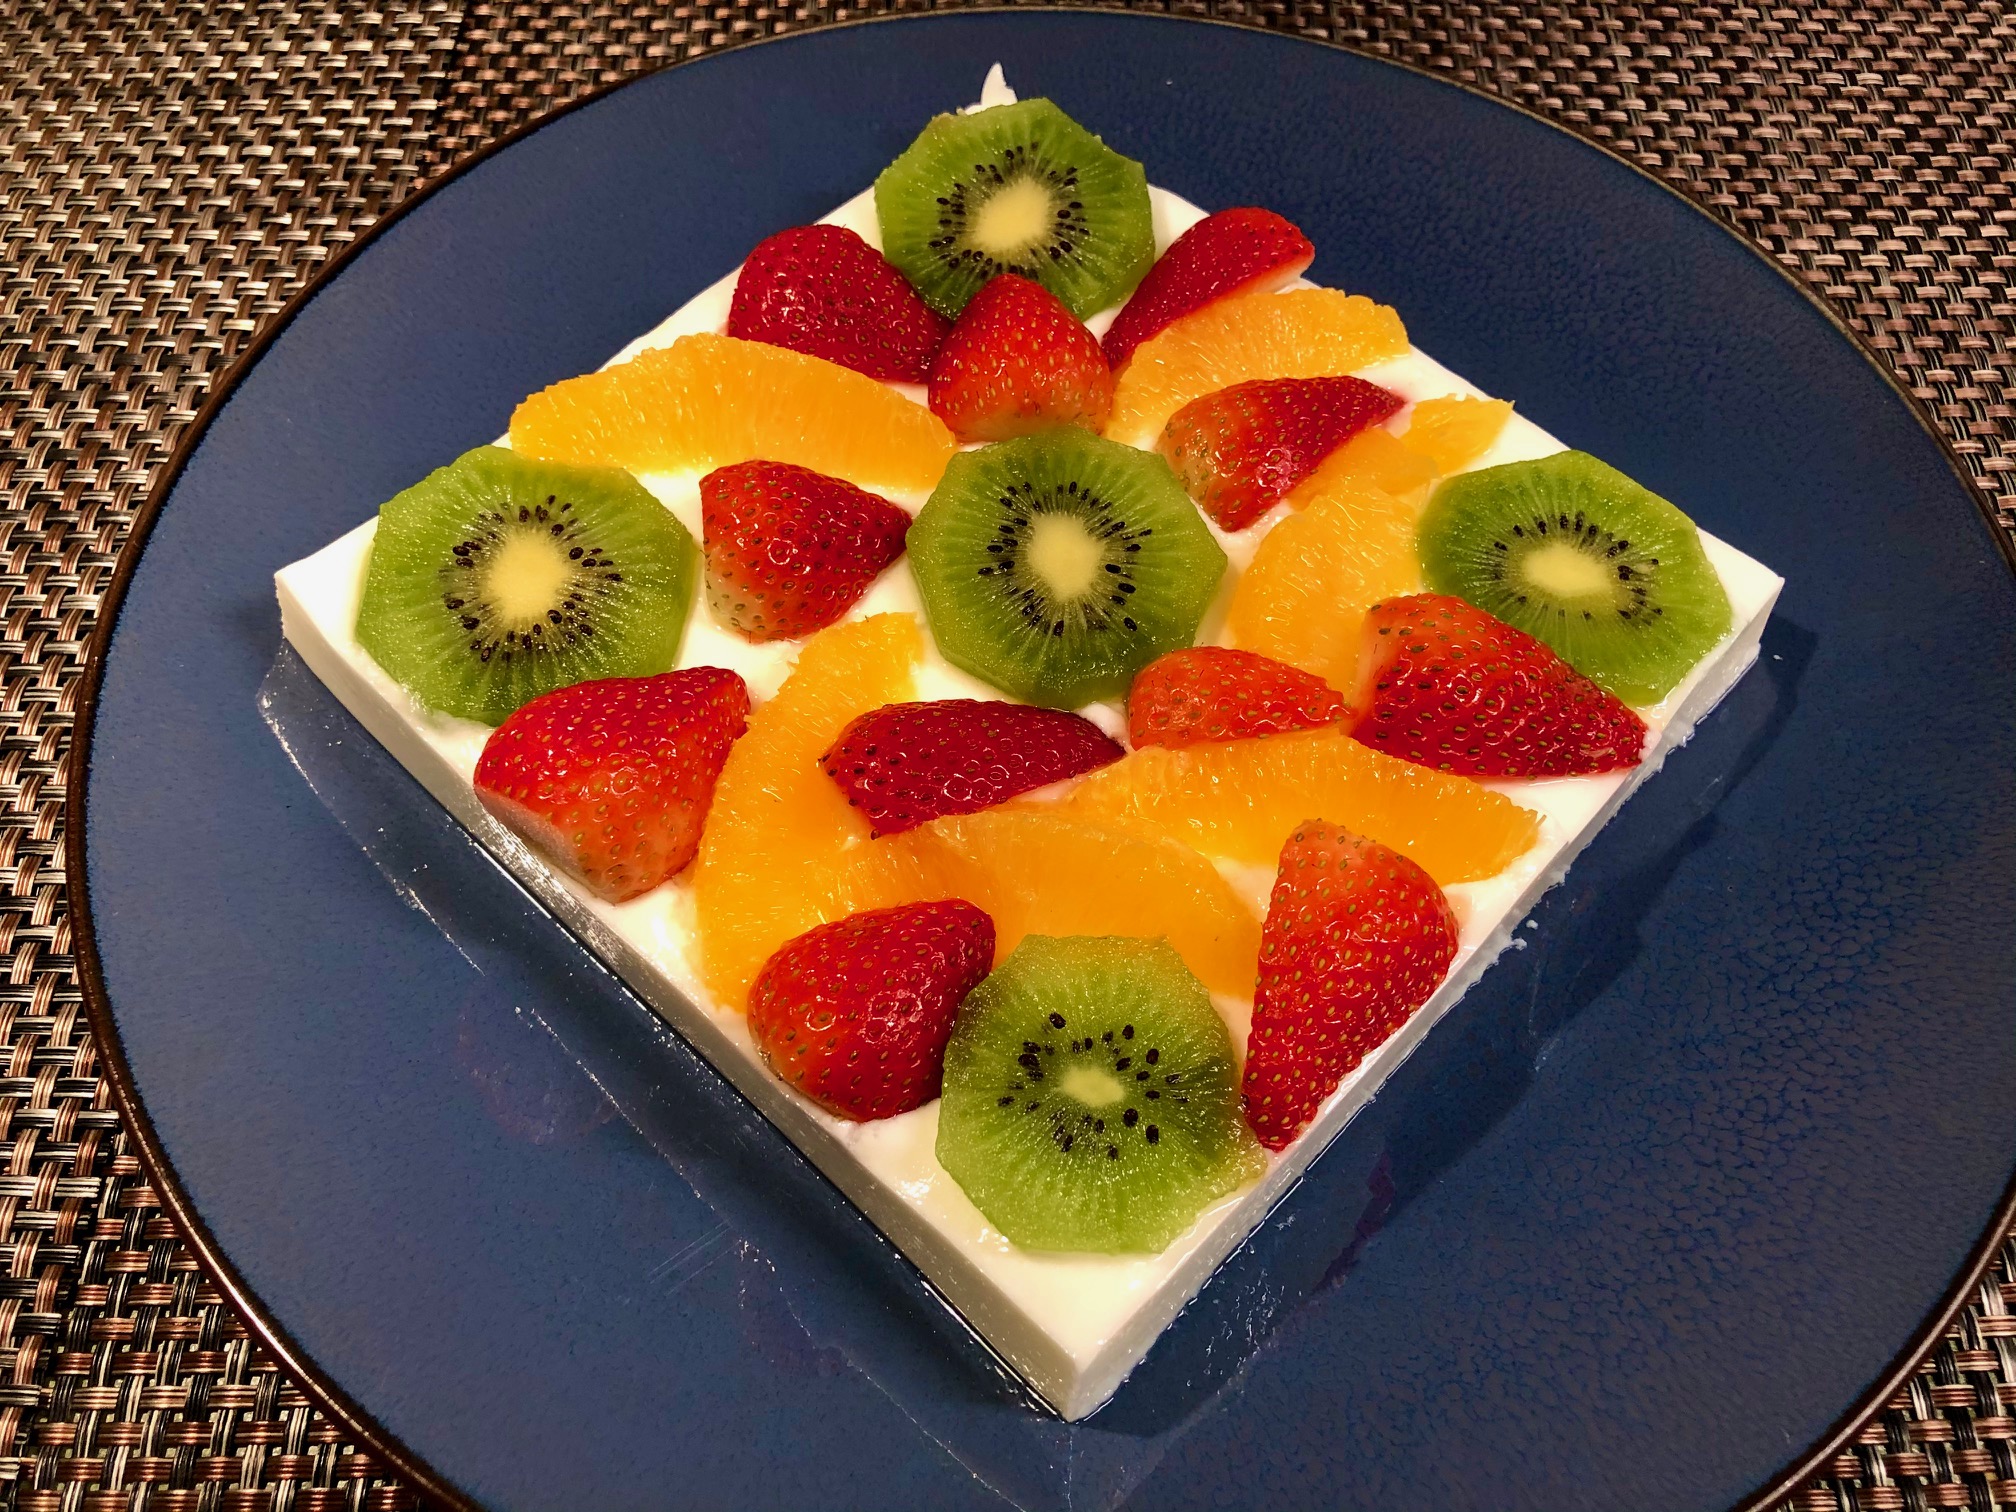 Fluffy yogurt jelly with fruits topping